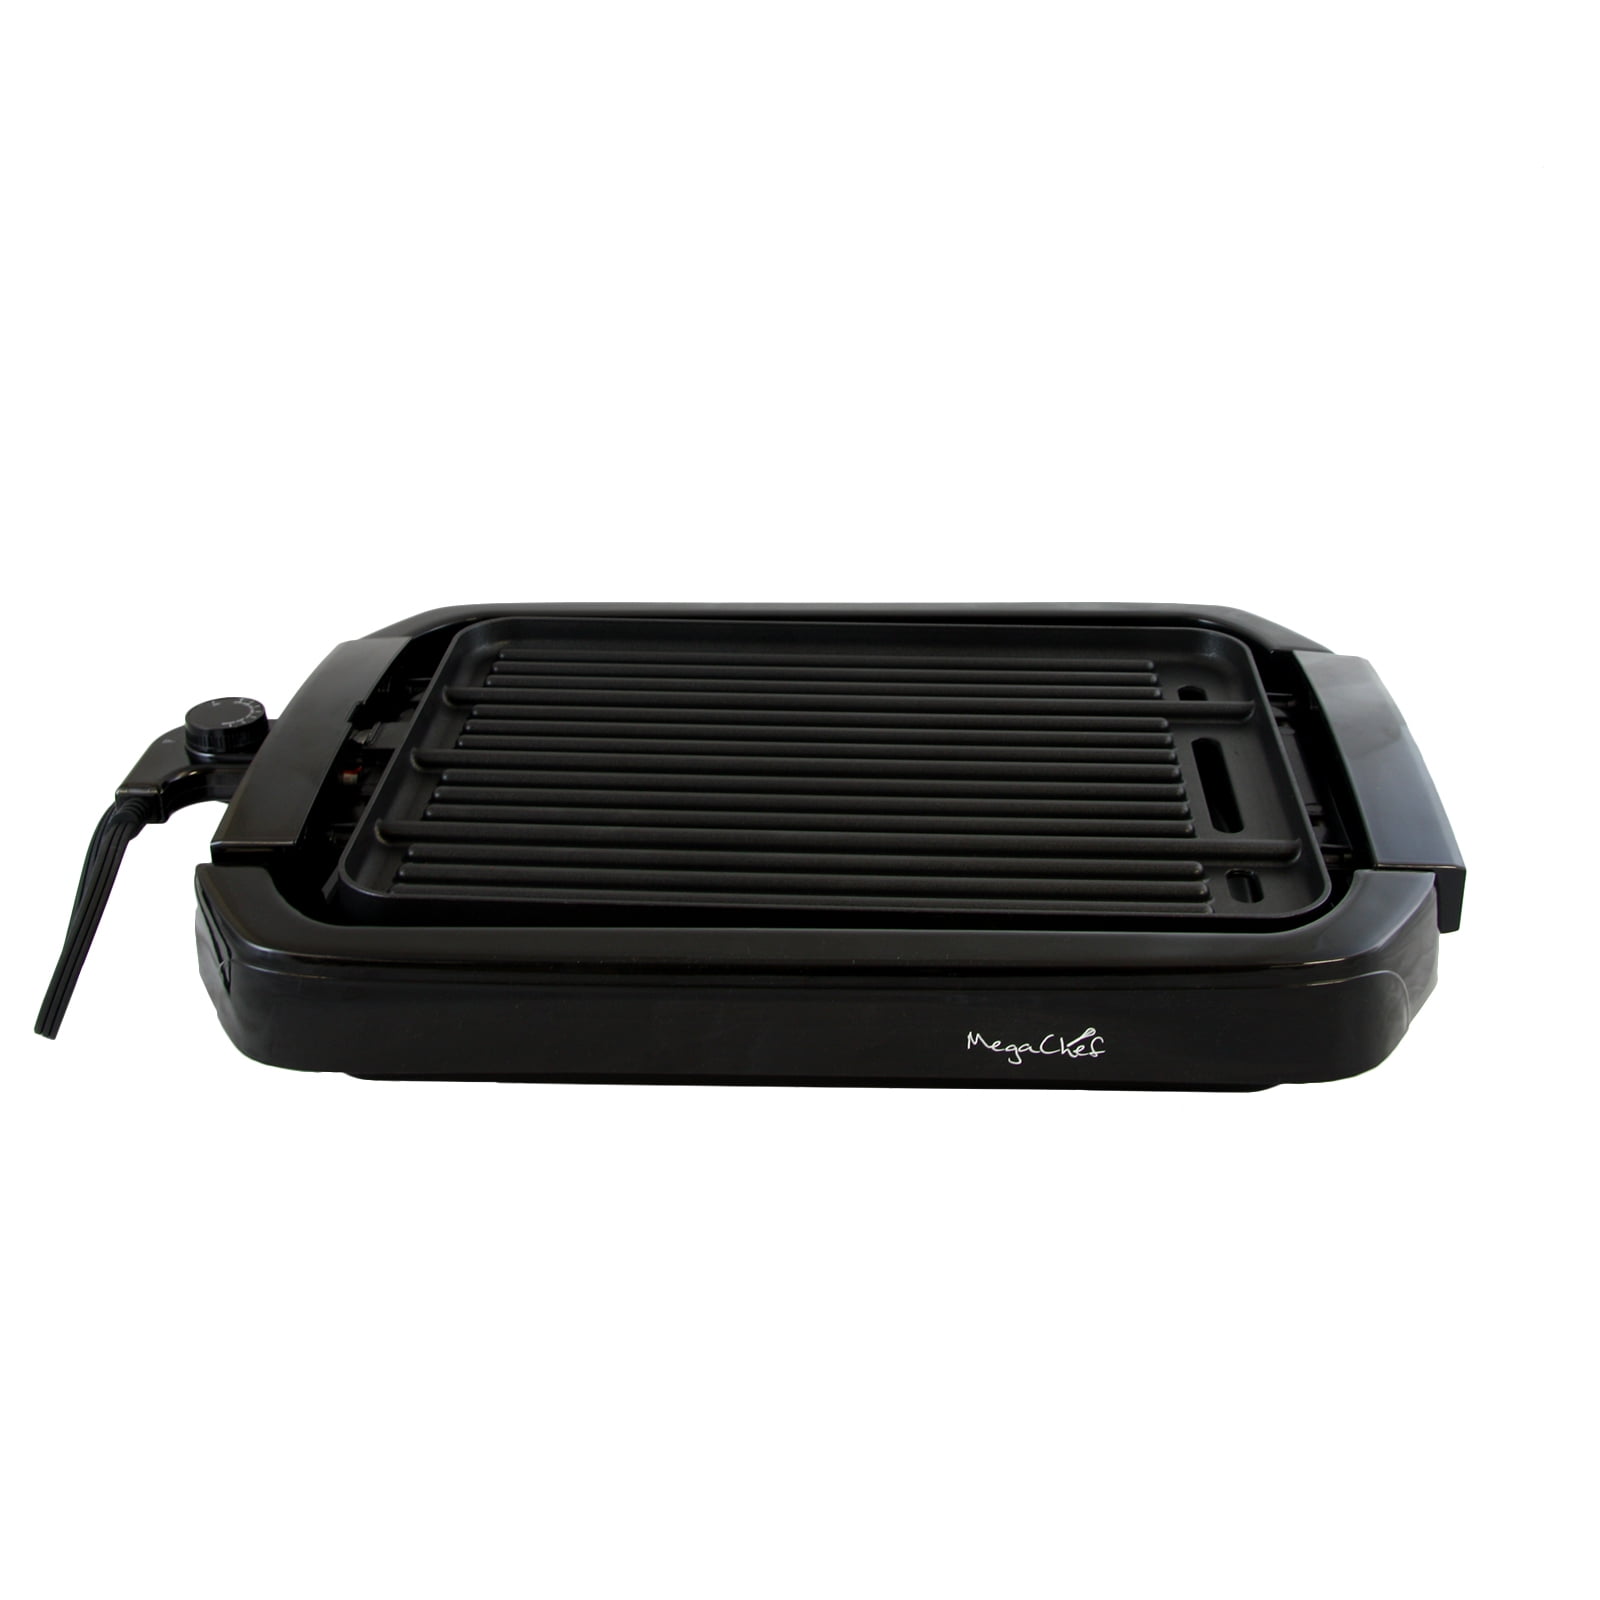  Power XL Smokeless Electric Indoor Removable Grill and Griddle  Plates, Nonstick Cooking Surfaces, Glass Lid, 1500 Watt, 21X 15.4X 8.1,  black: Home & Kitchen